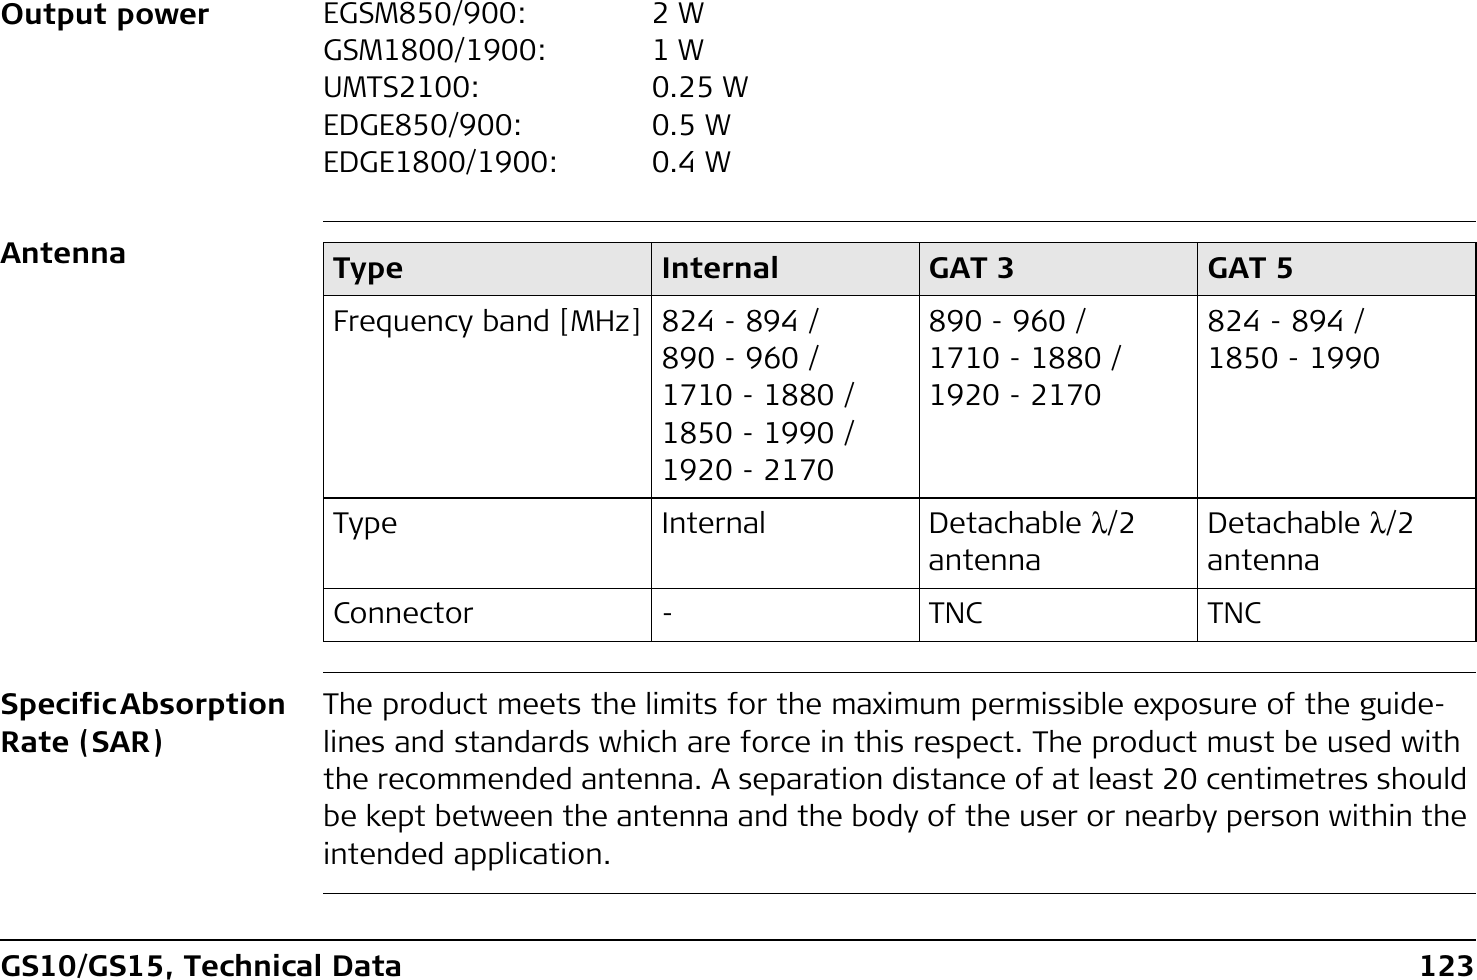 GS10/GS15, Technical Data 123Output powerAntennaSpecific Absorption Rate (SAR)The product meets the limits for the maximum permissible exposure of the guide-lines and standards which are force in this respect. The product must be used with the recommended antenna. A separation distance of at least 20 centimetres should be kept between the antenna and the body of the user or nearby person within the intended application.EGSM850/900: 2 WGSM1800/1900: 1 WUMTS2100: 0.25 WEDGE850/900: 0.5 WEDGE1800/1900: 0.4 WType Internal GAT 3 GAT 5Frequency band [MHz] 824 - 894 /890 - 960 /1710 - 1880 /1850 - 1990 /1920 - 2170890 - 960 /1710 - 1880 /1920 - 2170824 - 894 /1850 - 1990Type Internal Detachable λ/2 antennaDetachable λ/2 antennaConnector - TNC TNC